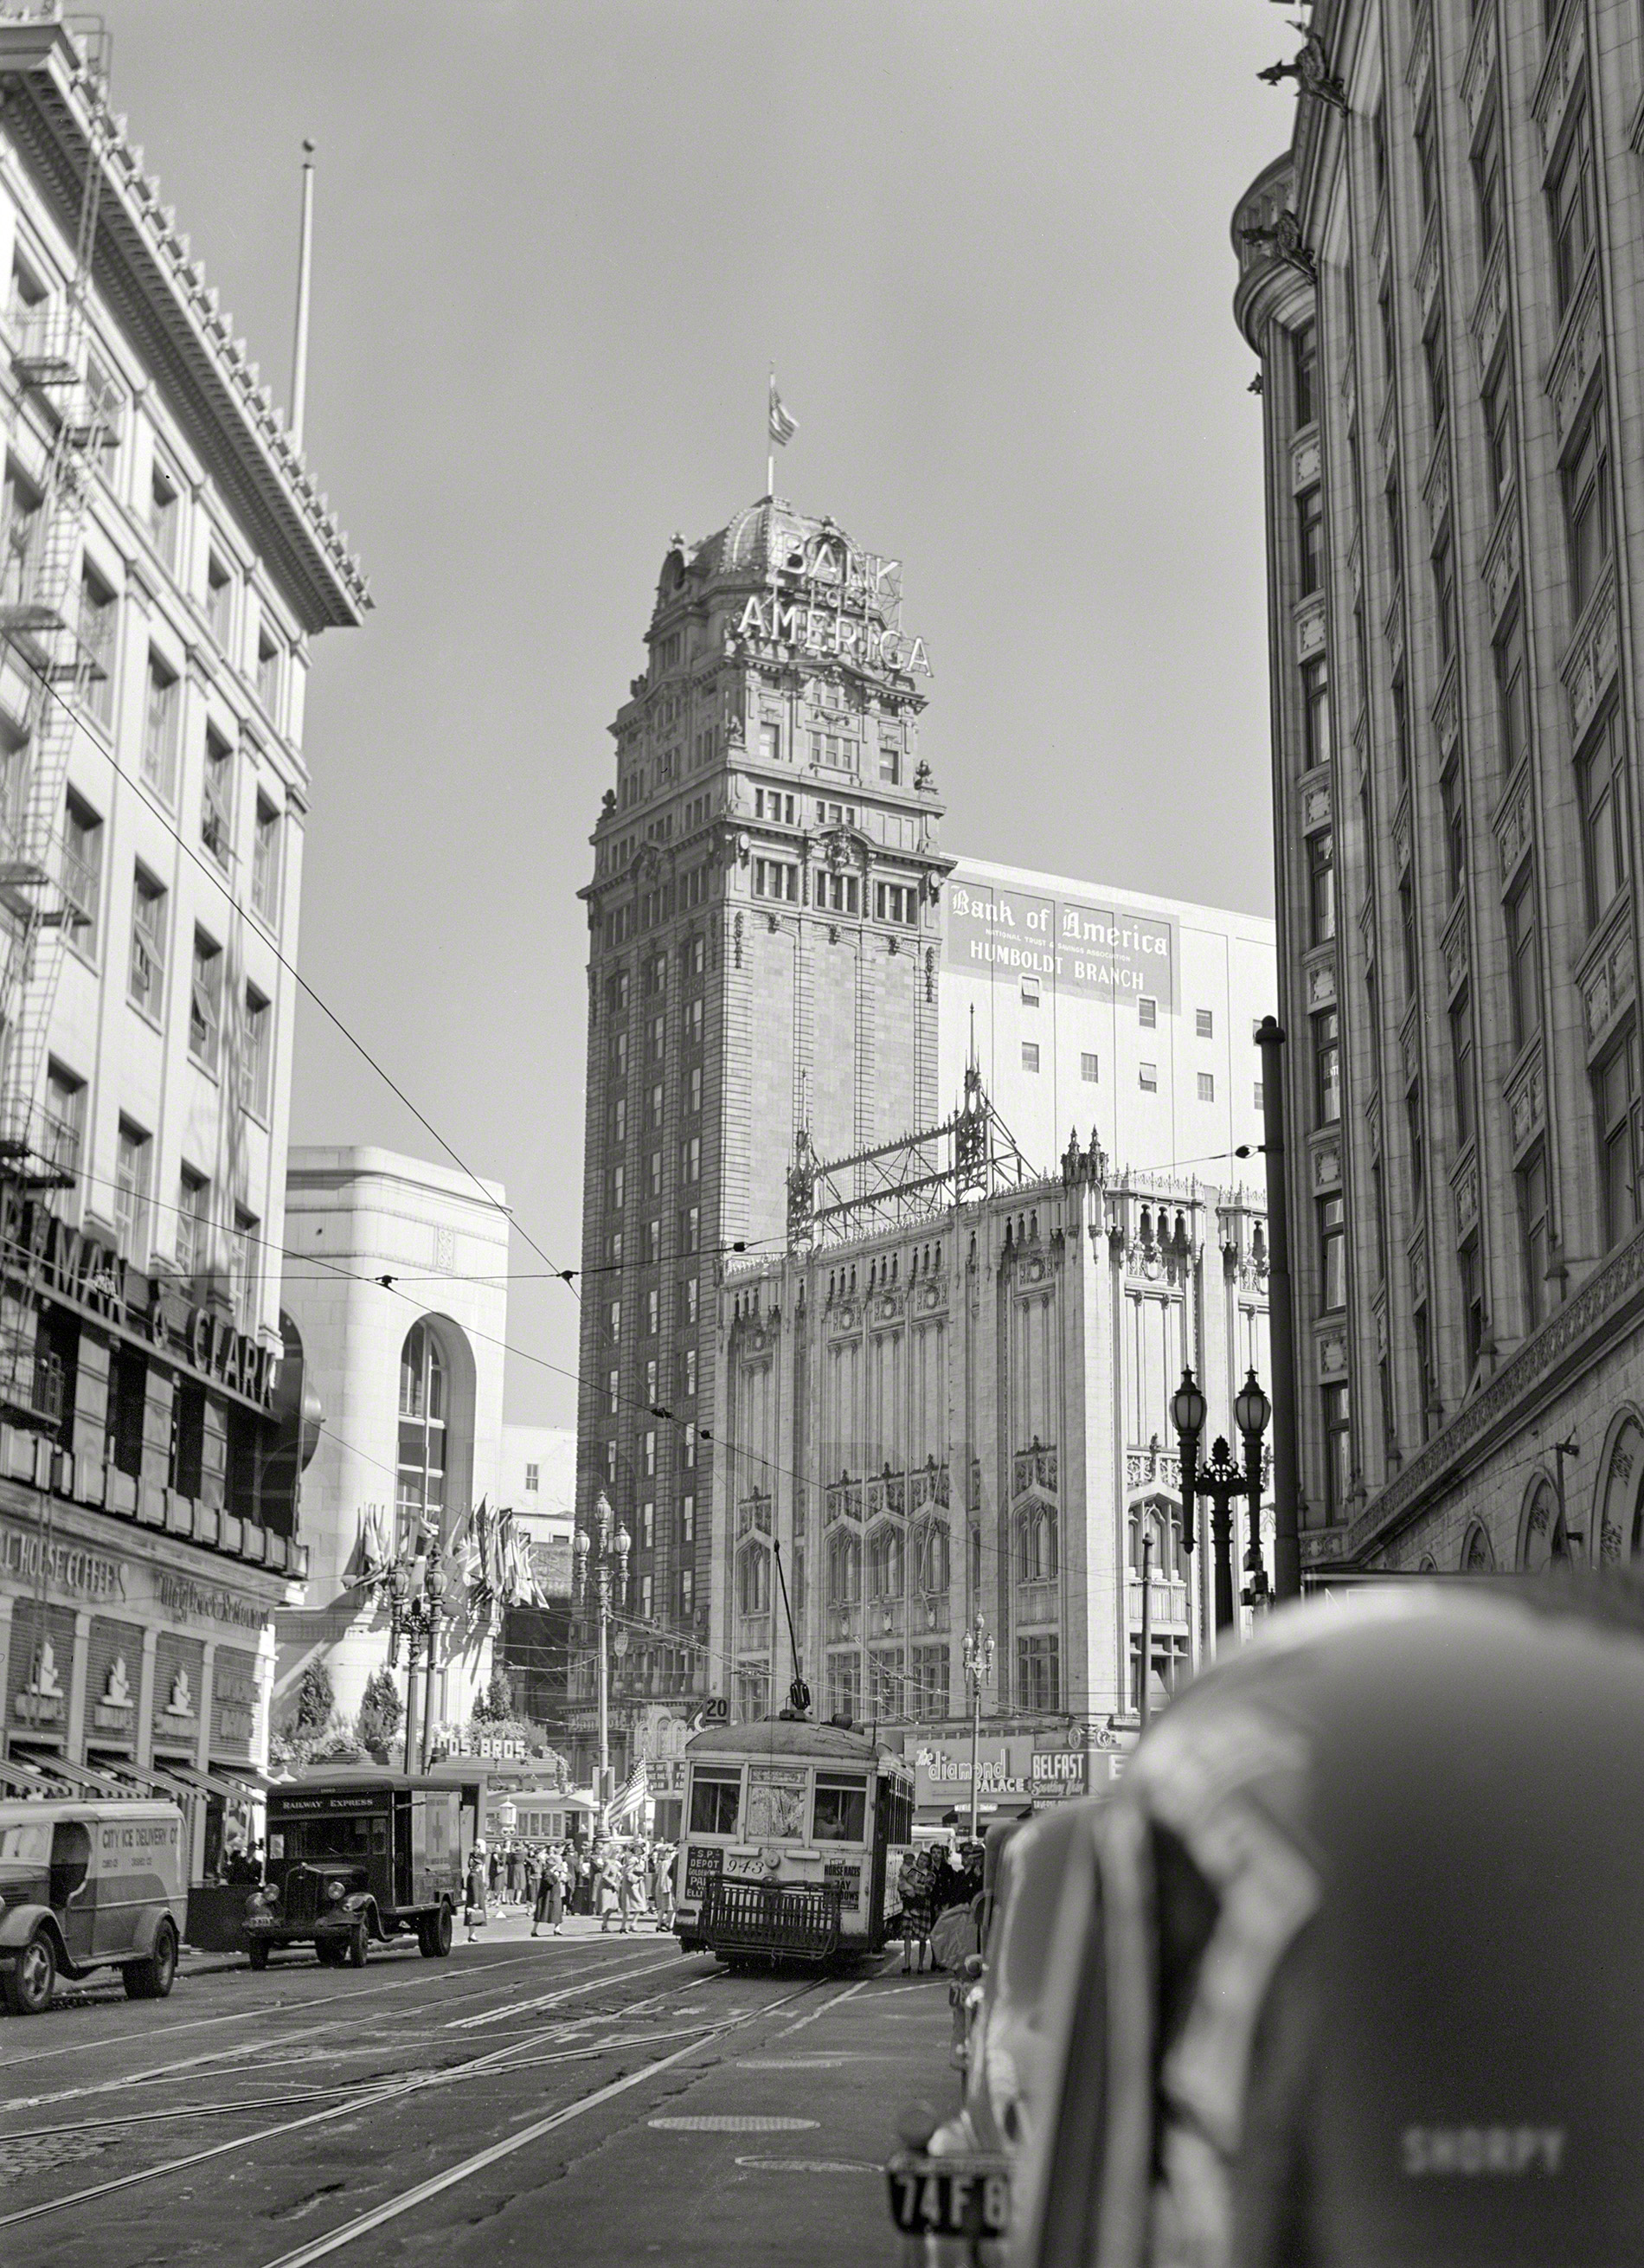 May 1943. "San Francisco, California. The Bank of America." Medium format negative by Ann Rosener for the Office of War Information. View full size.